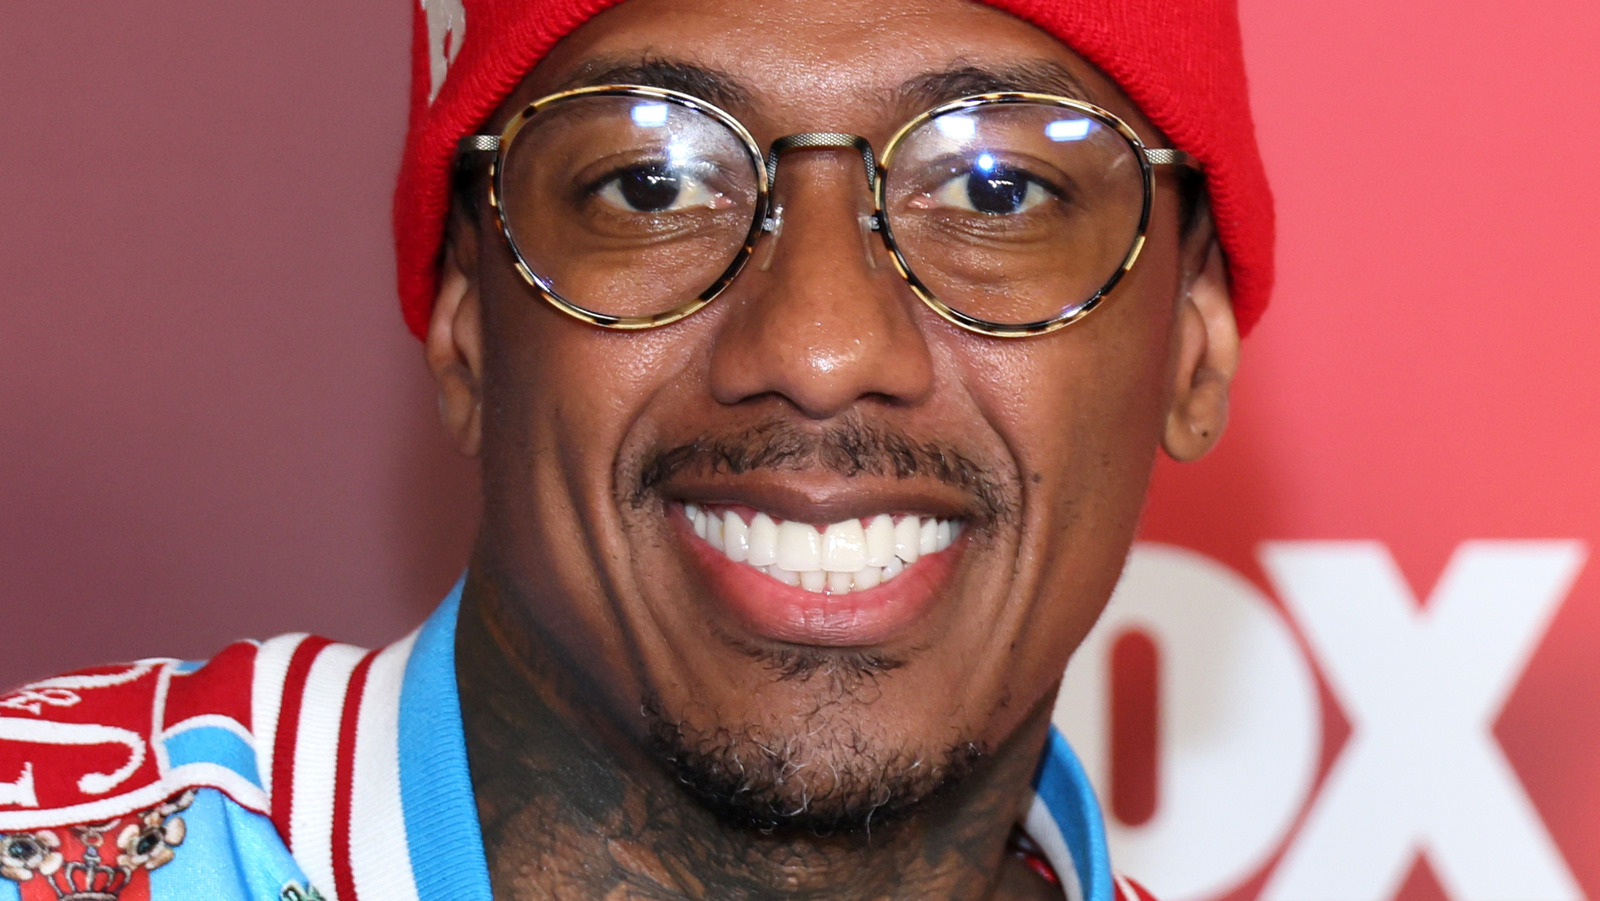 Bre Tiesi Opens Up About 'Beautiful Relationship' with Nick Cannon